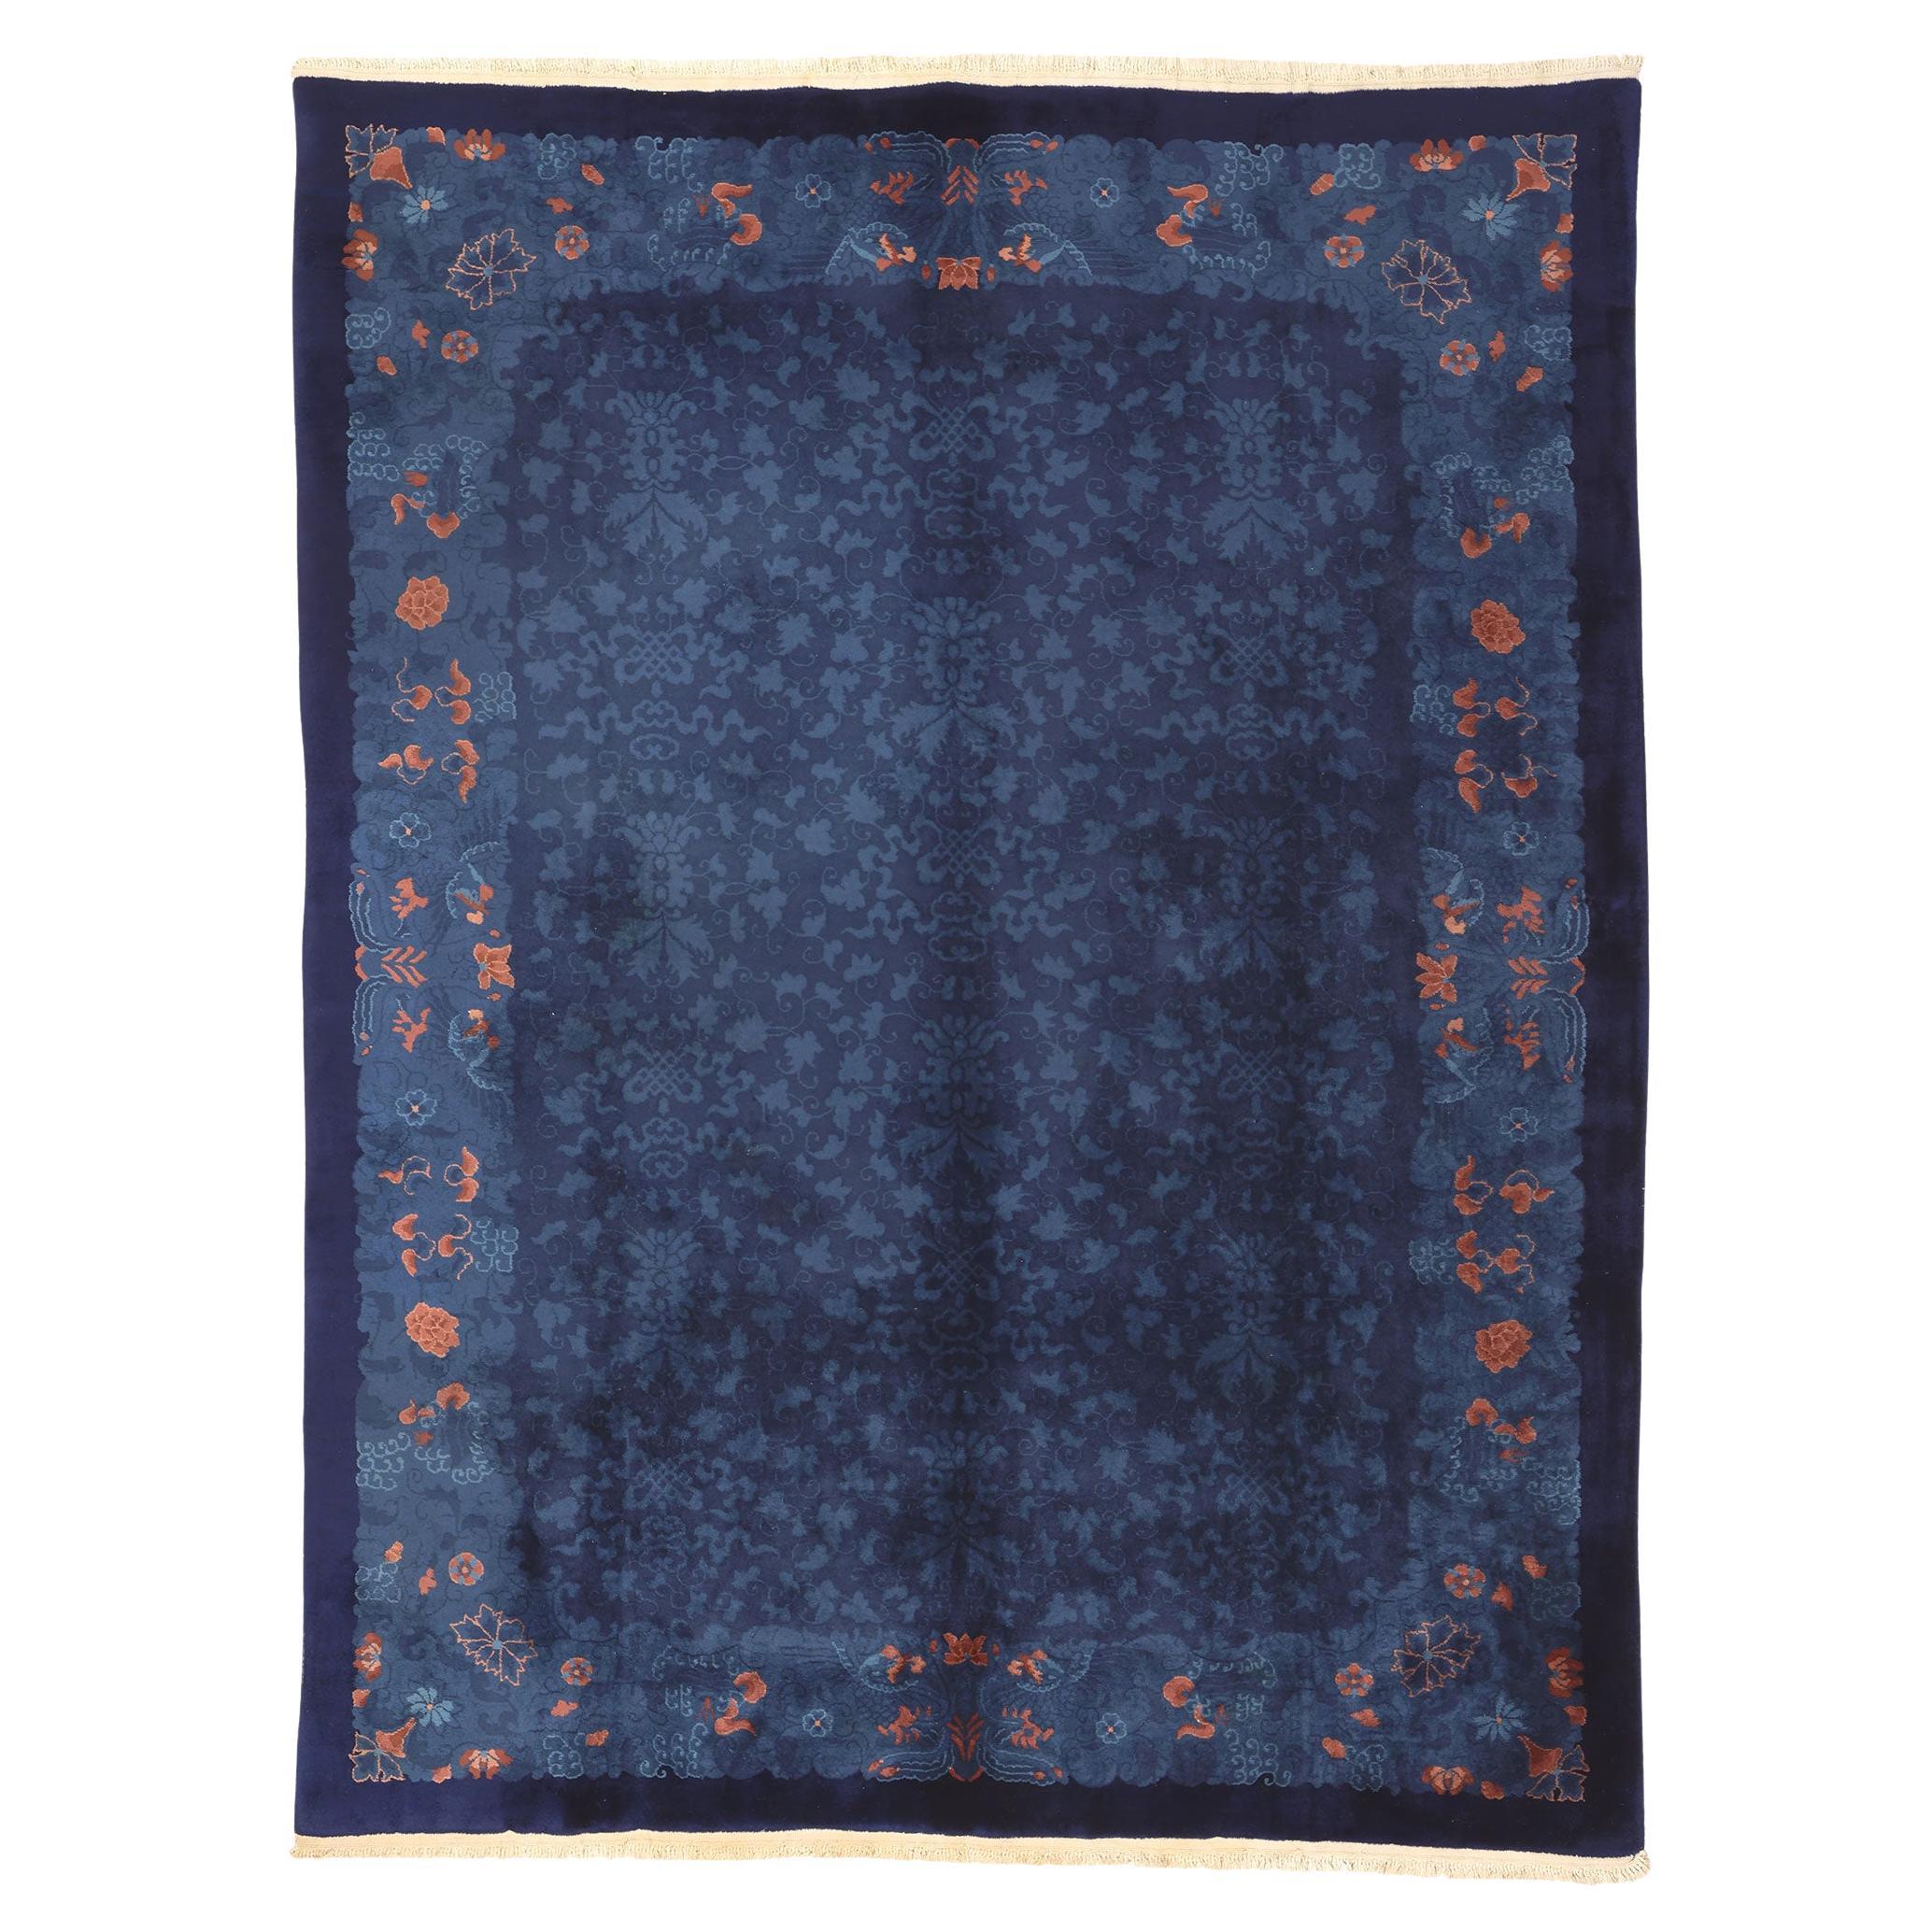 Antique Blue Chinese Art Deco Rug, Maximalist Style Meets Qing Dynasty